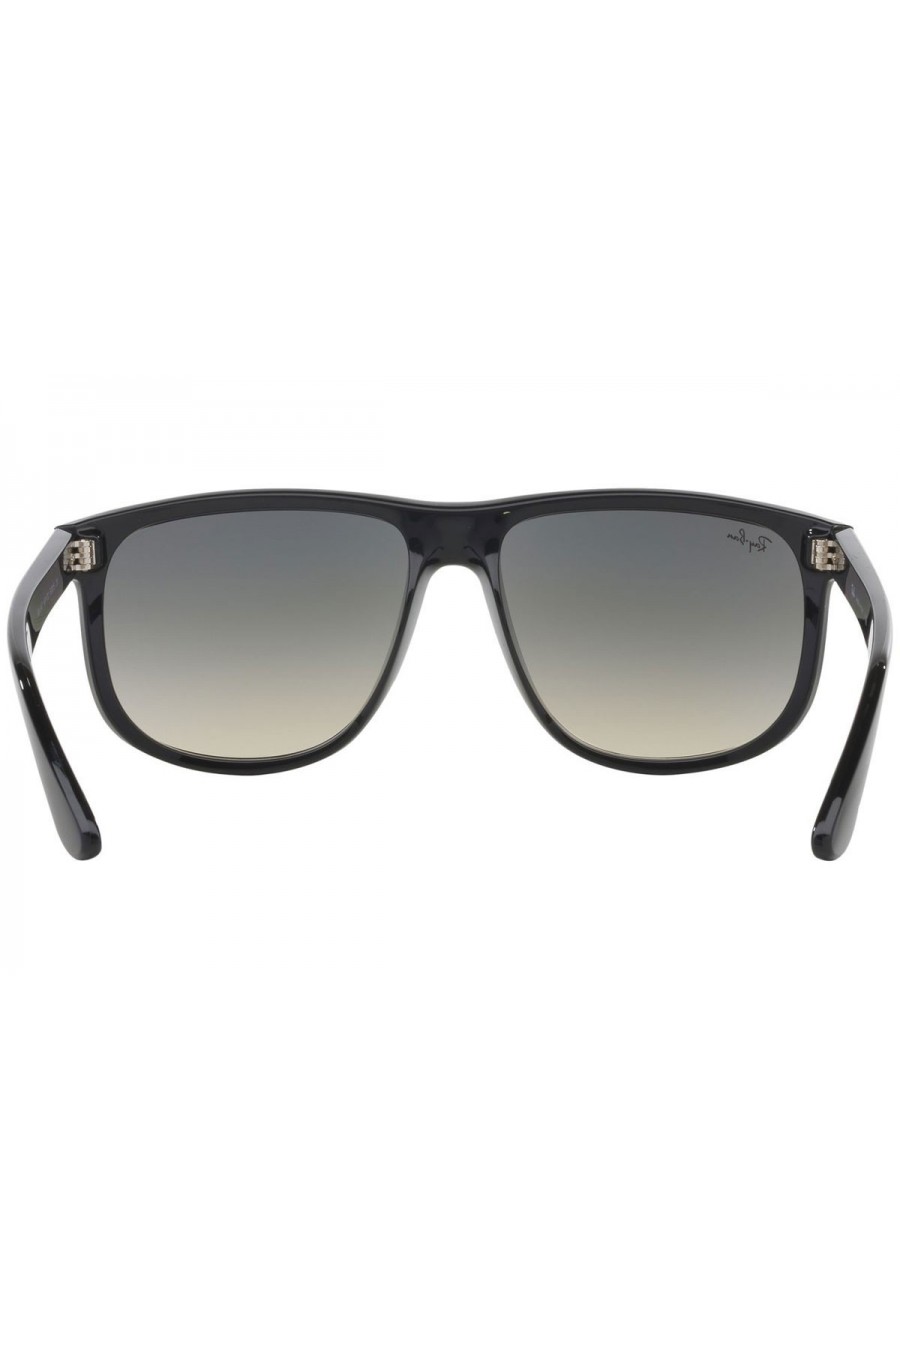 The form Commemorative See through RAY-BAN RB4147-601/32